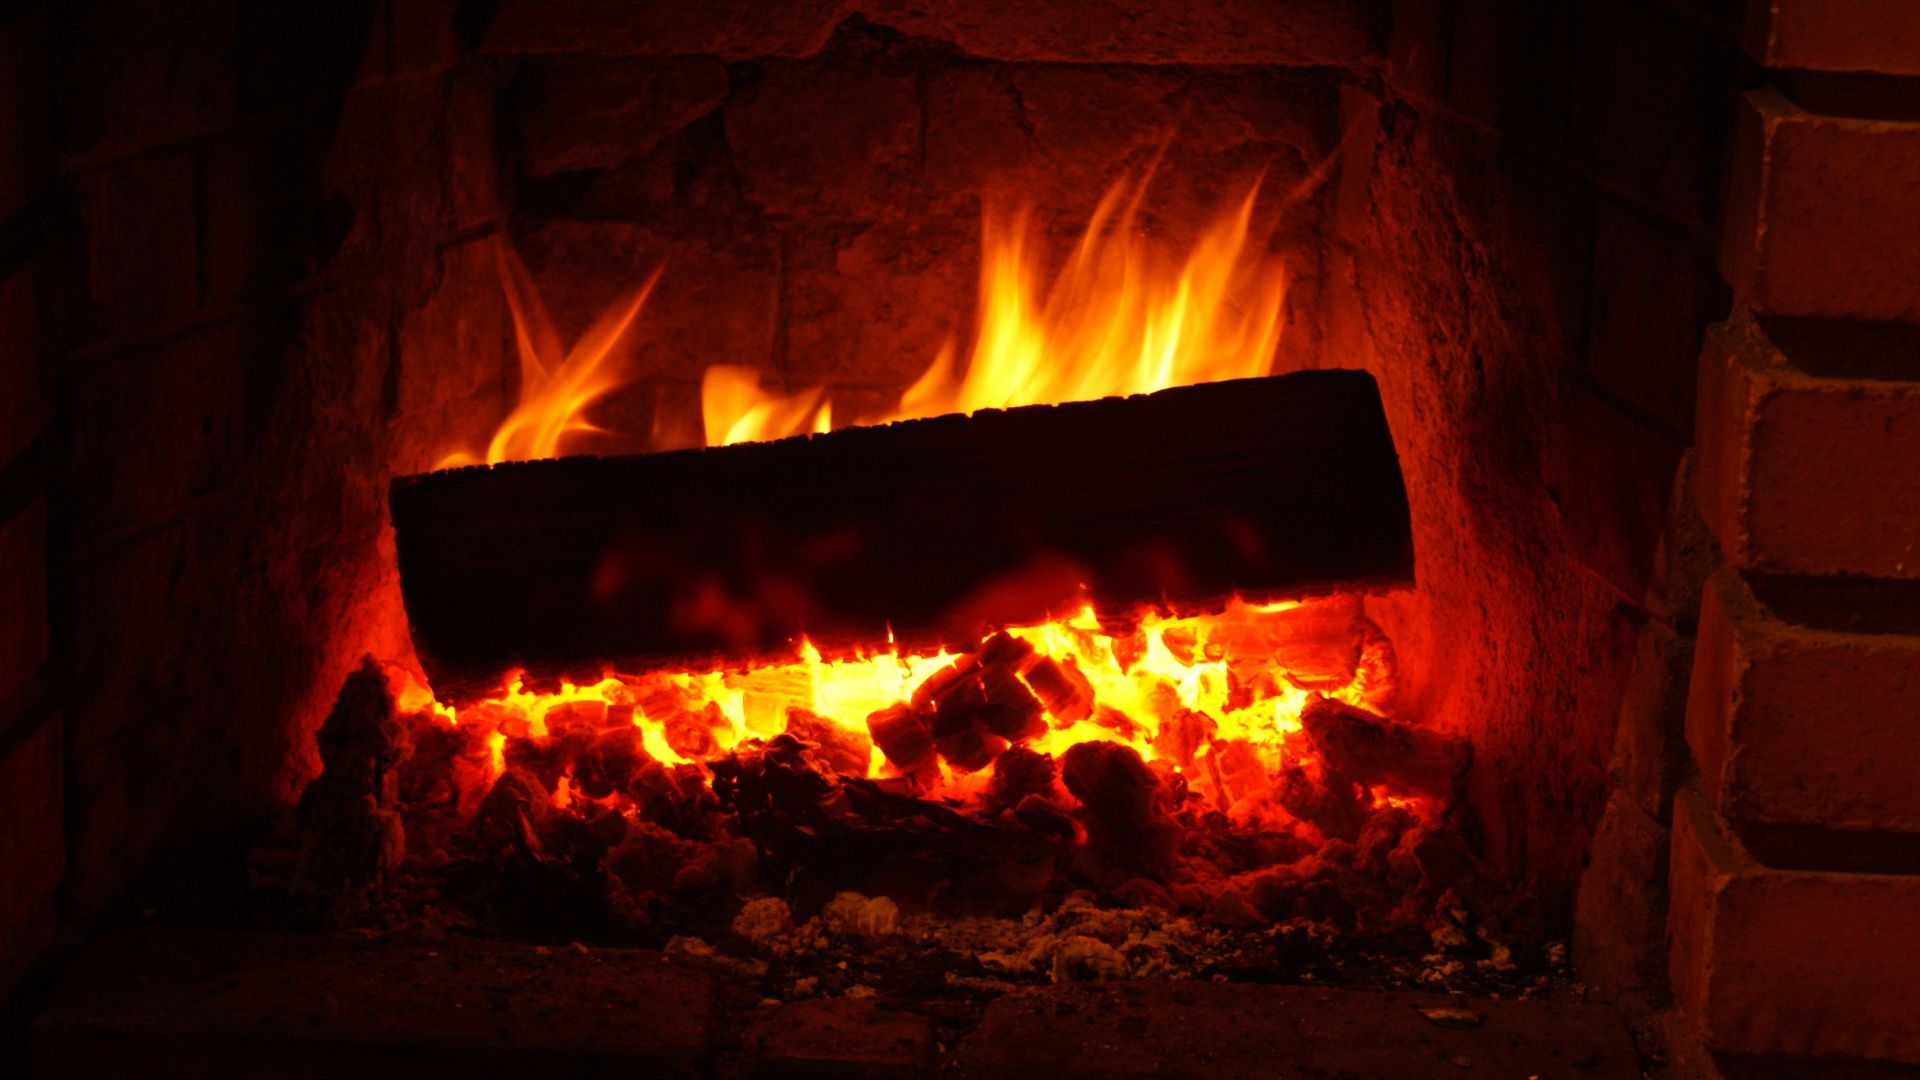 Fireplaces Wallpaper. Fireplaces Wallpaper, Fireplaces Background and